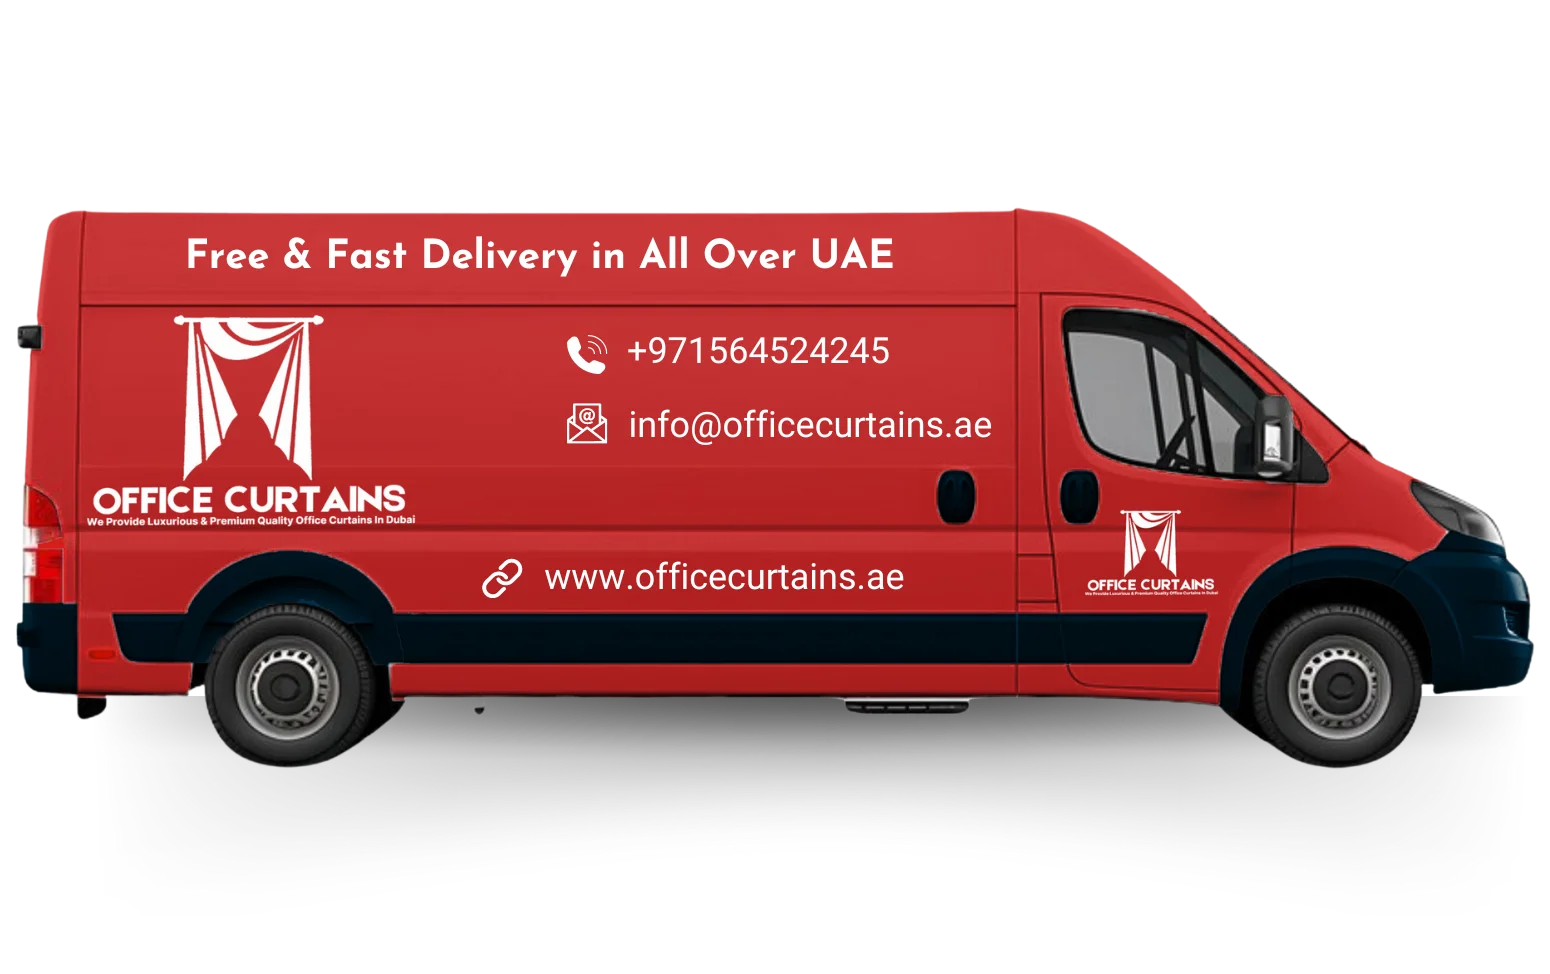 Free & Fast Delivery in All Over UAE.